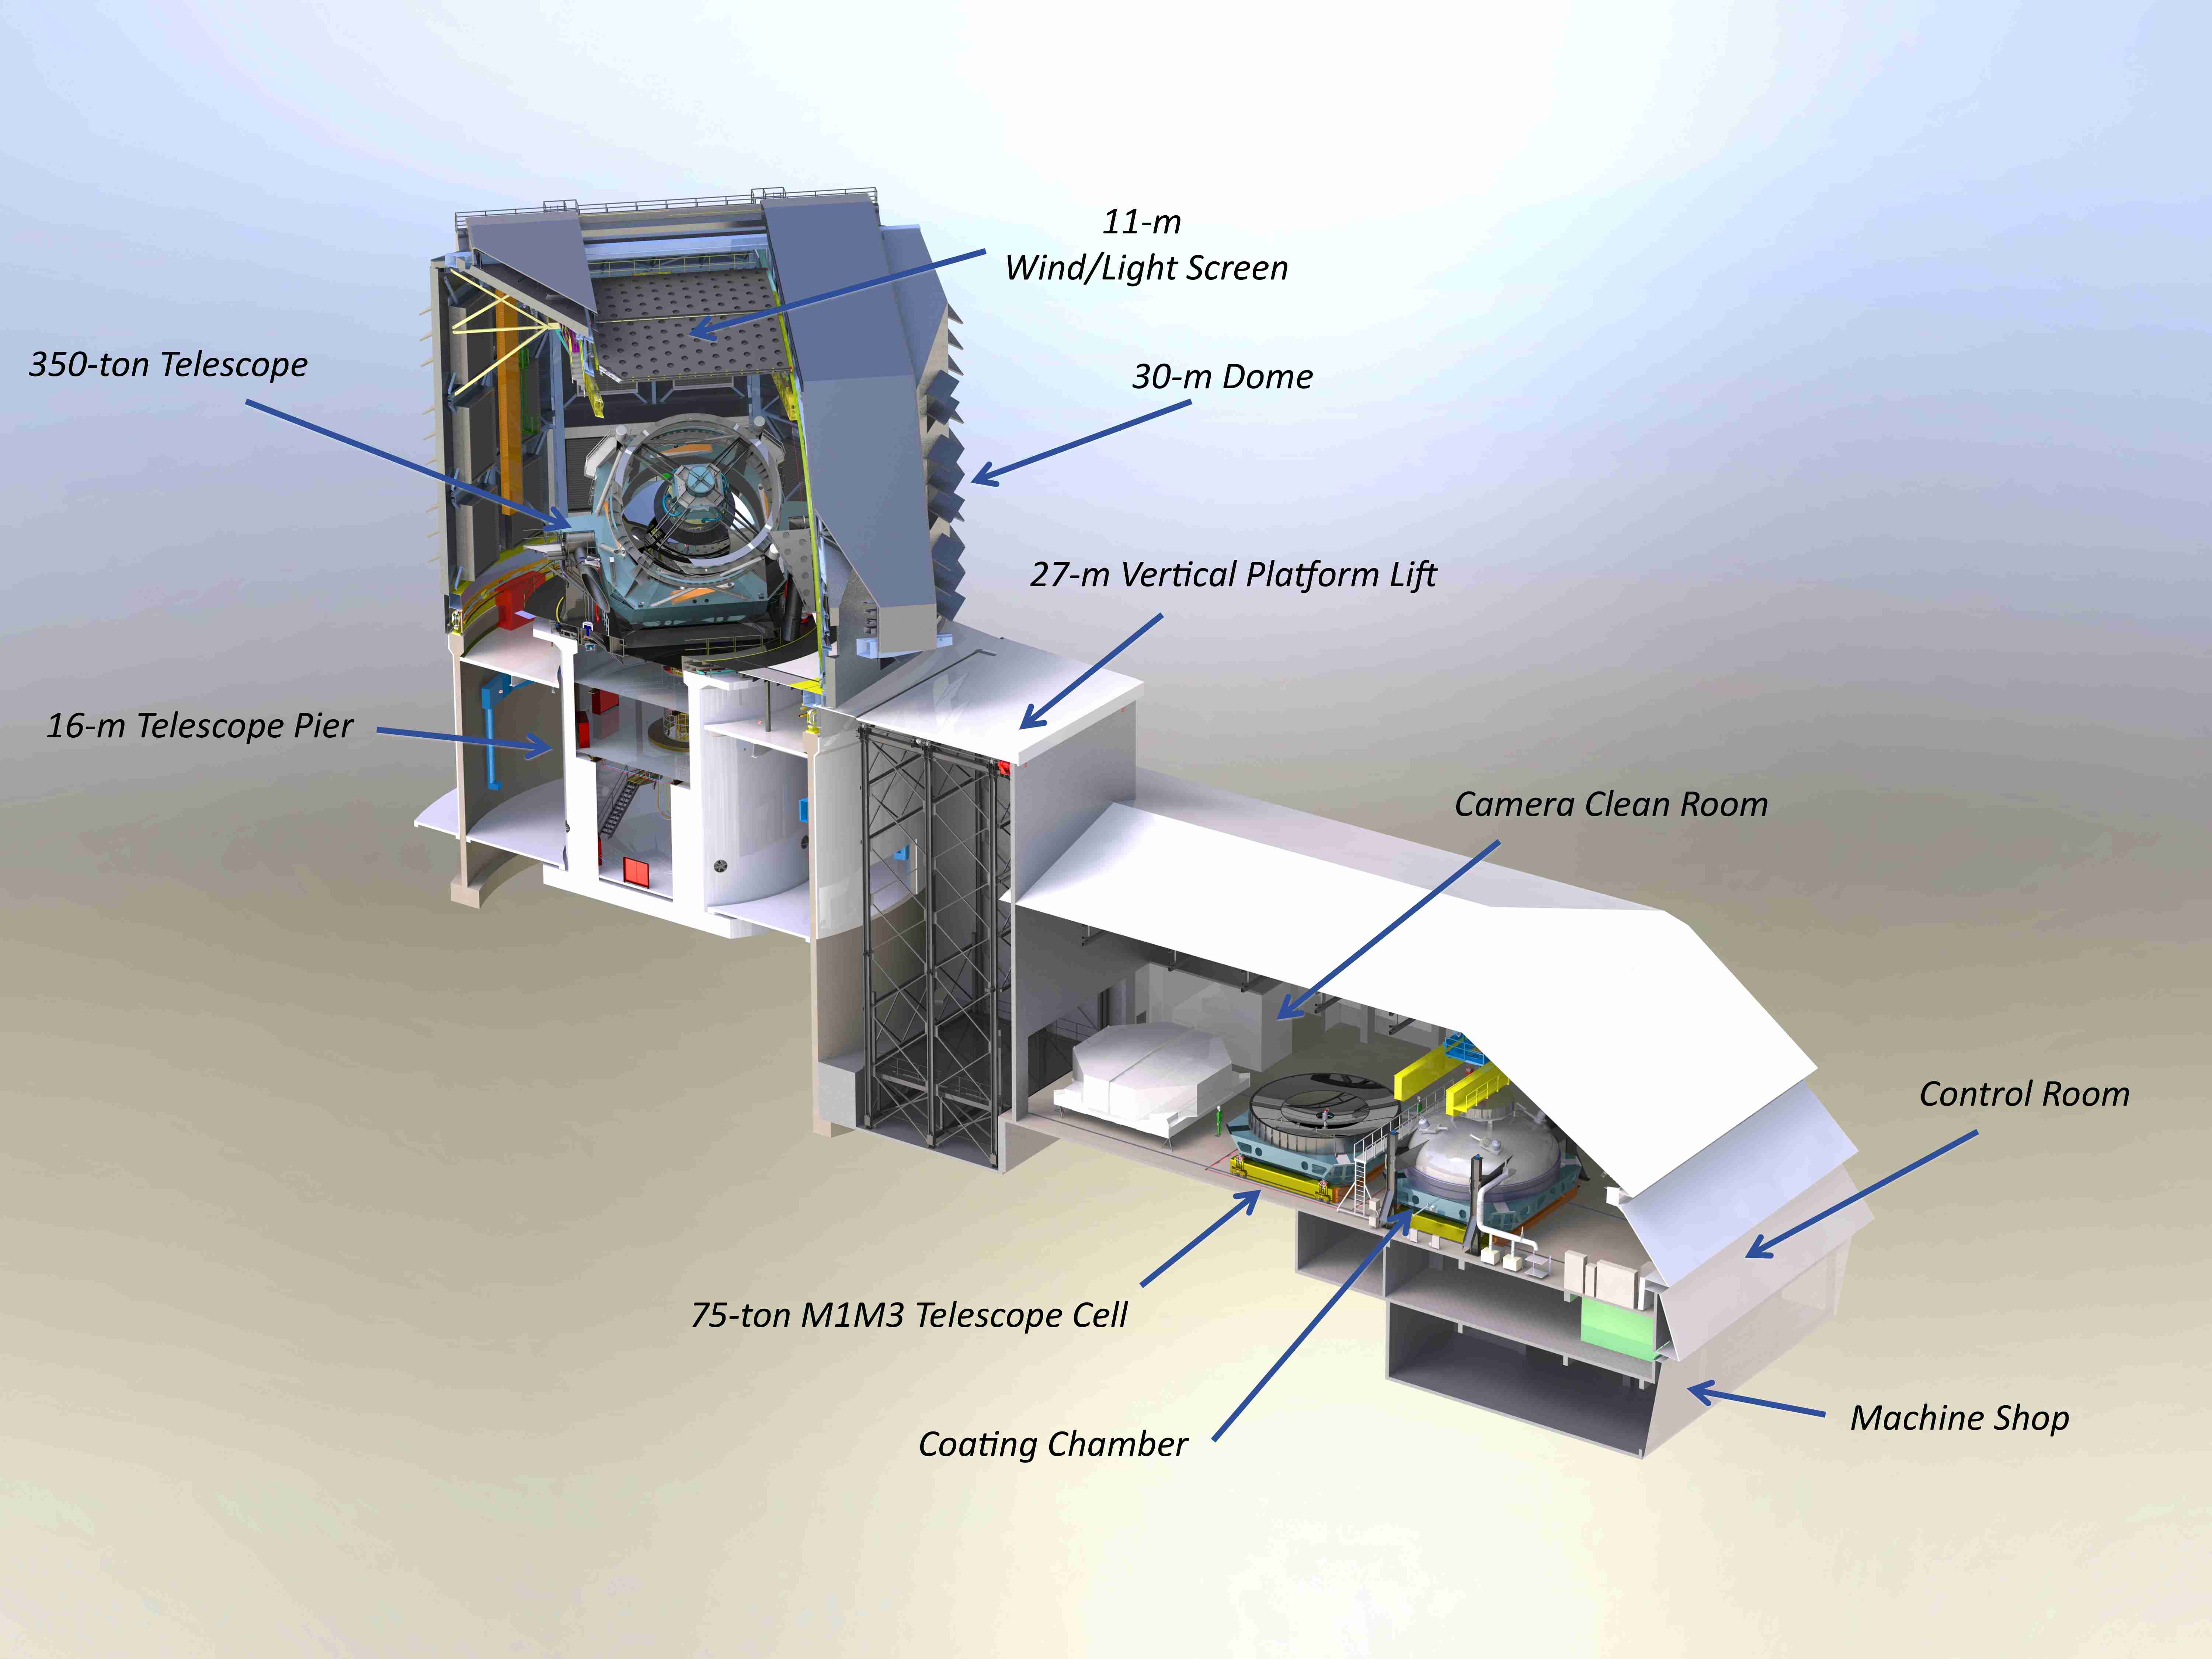 Images Wikimedia Commons/16 LSST_Telescope-cutaway-labels_1.jpg